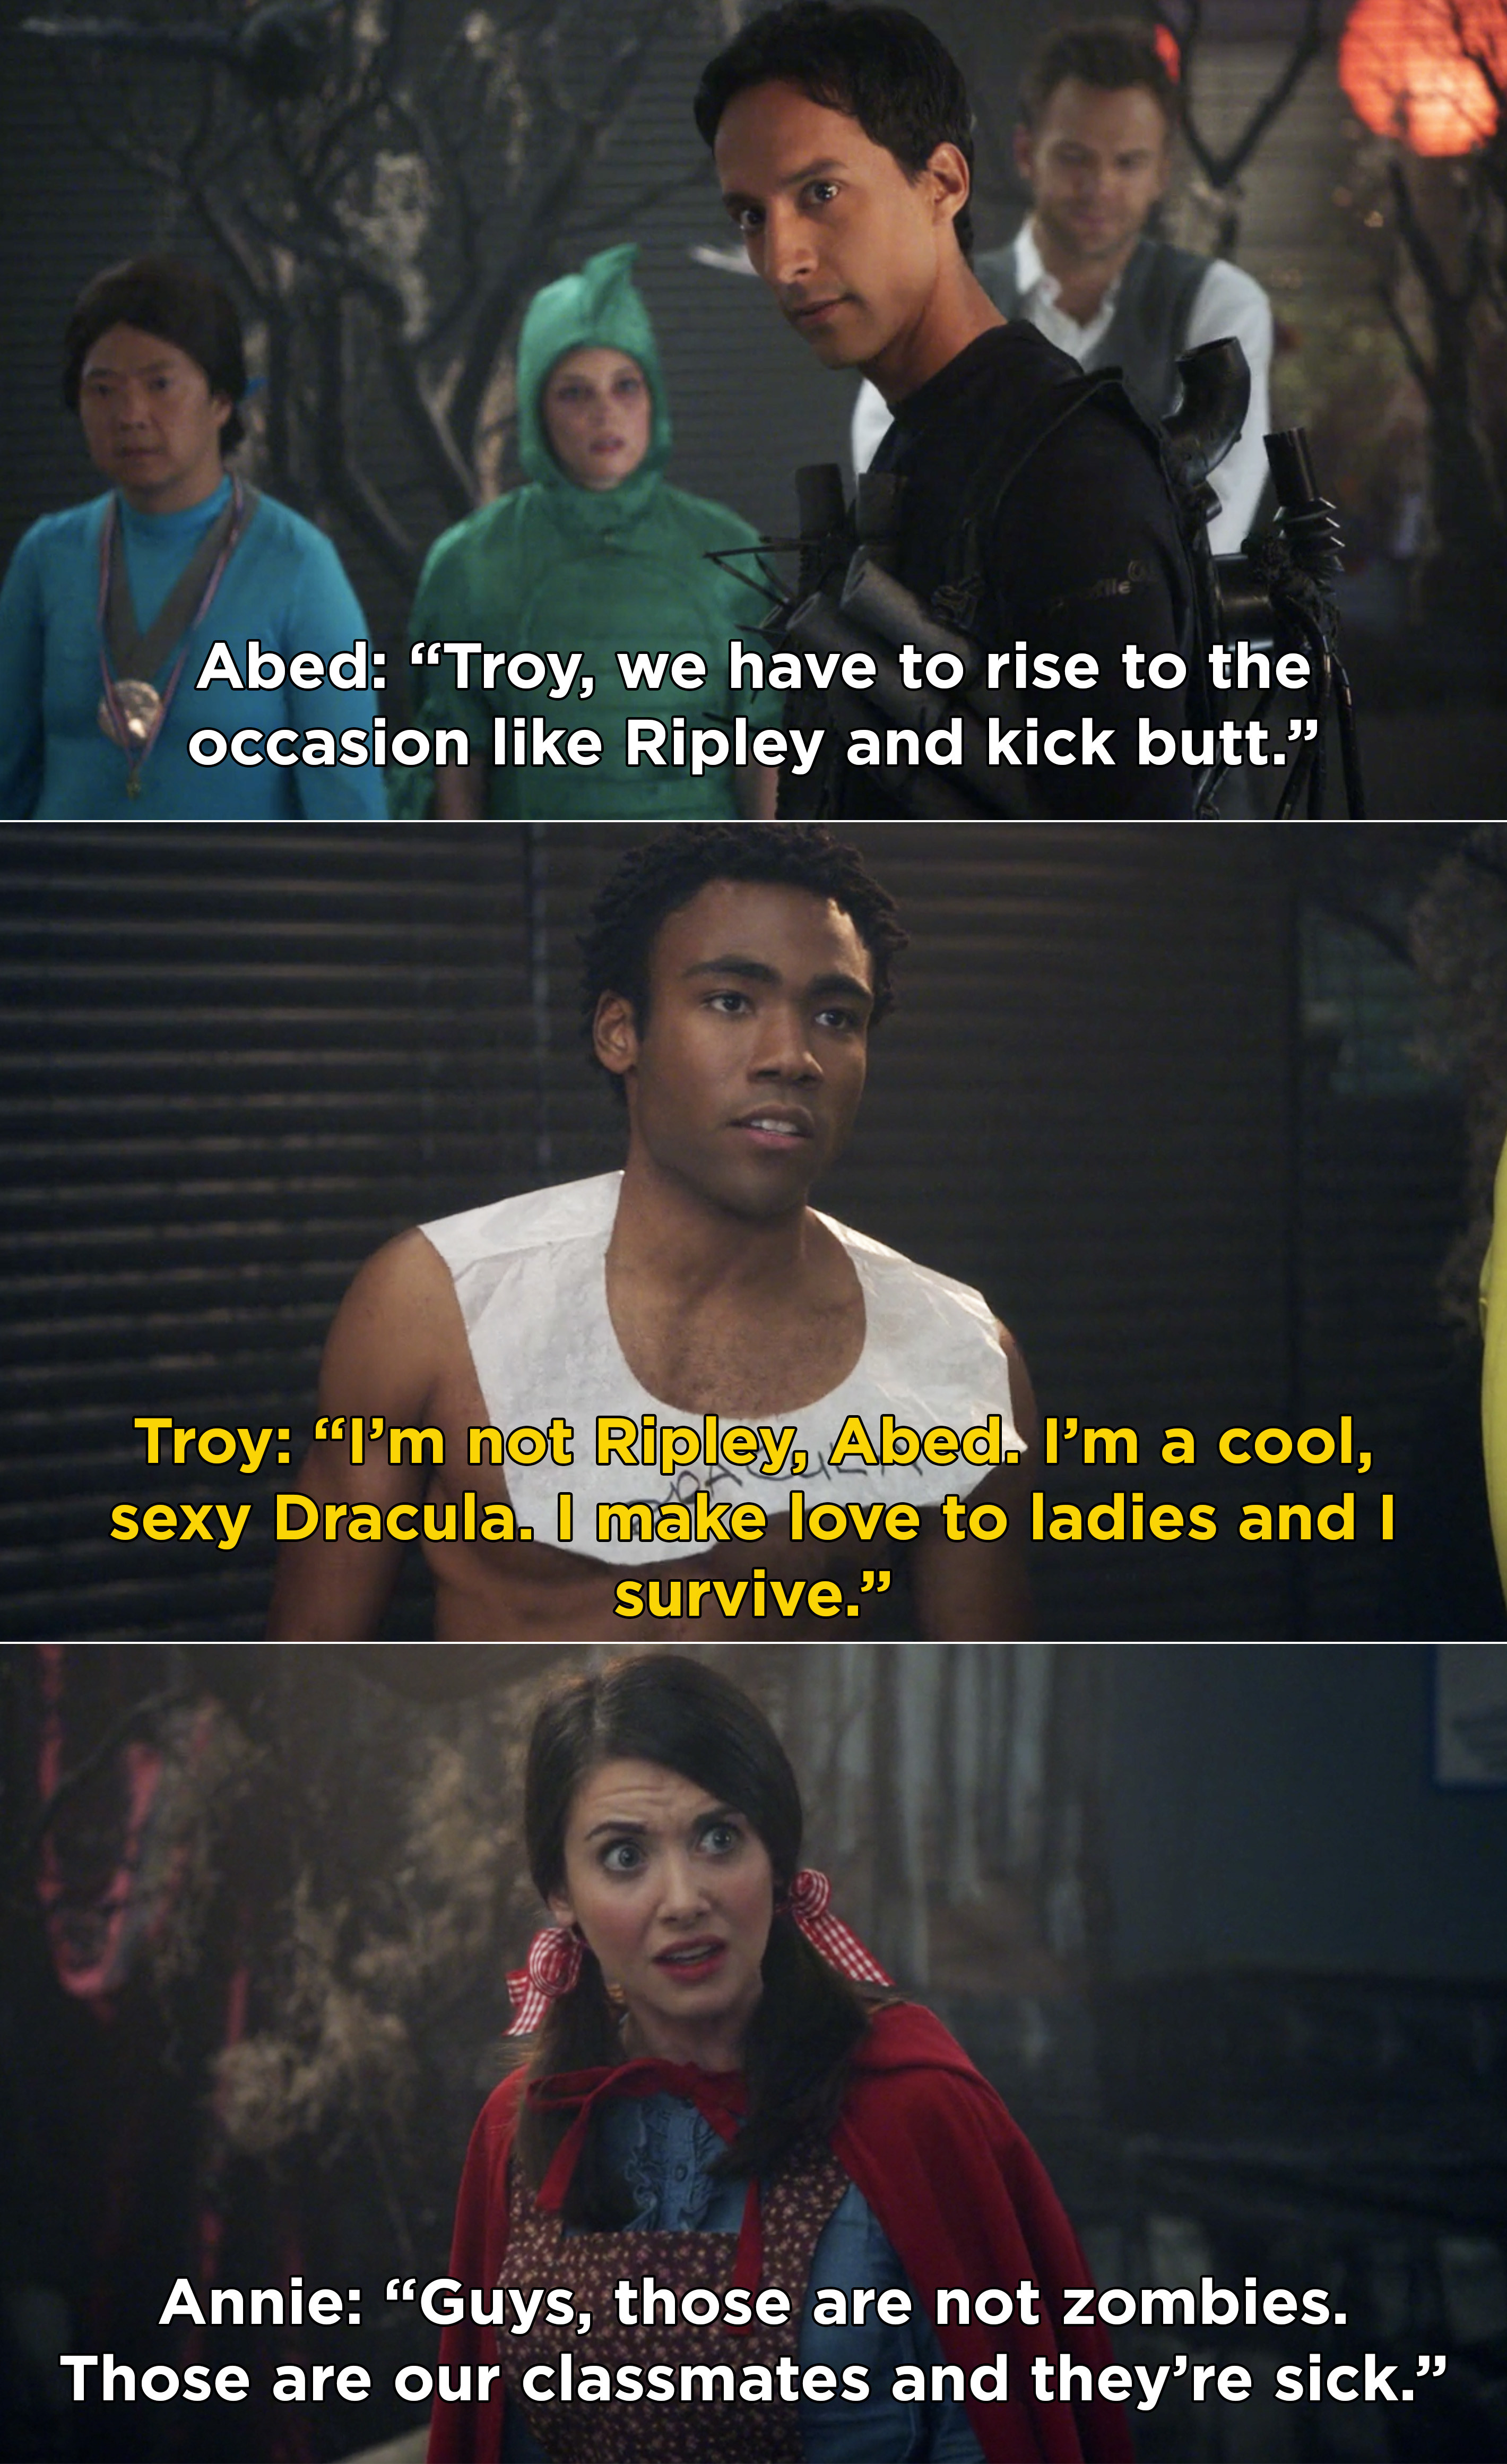 Abed trying to get Troy to help him, but Troy wants to continue being a &quot;cool, sexy Dracula&quot;